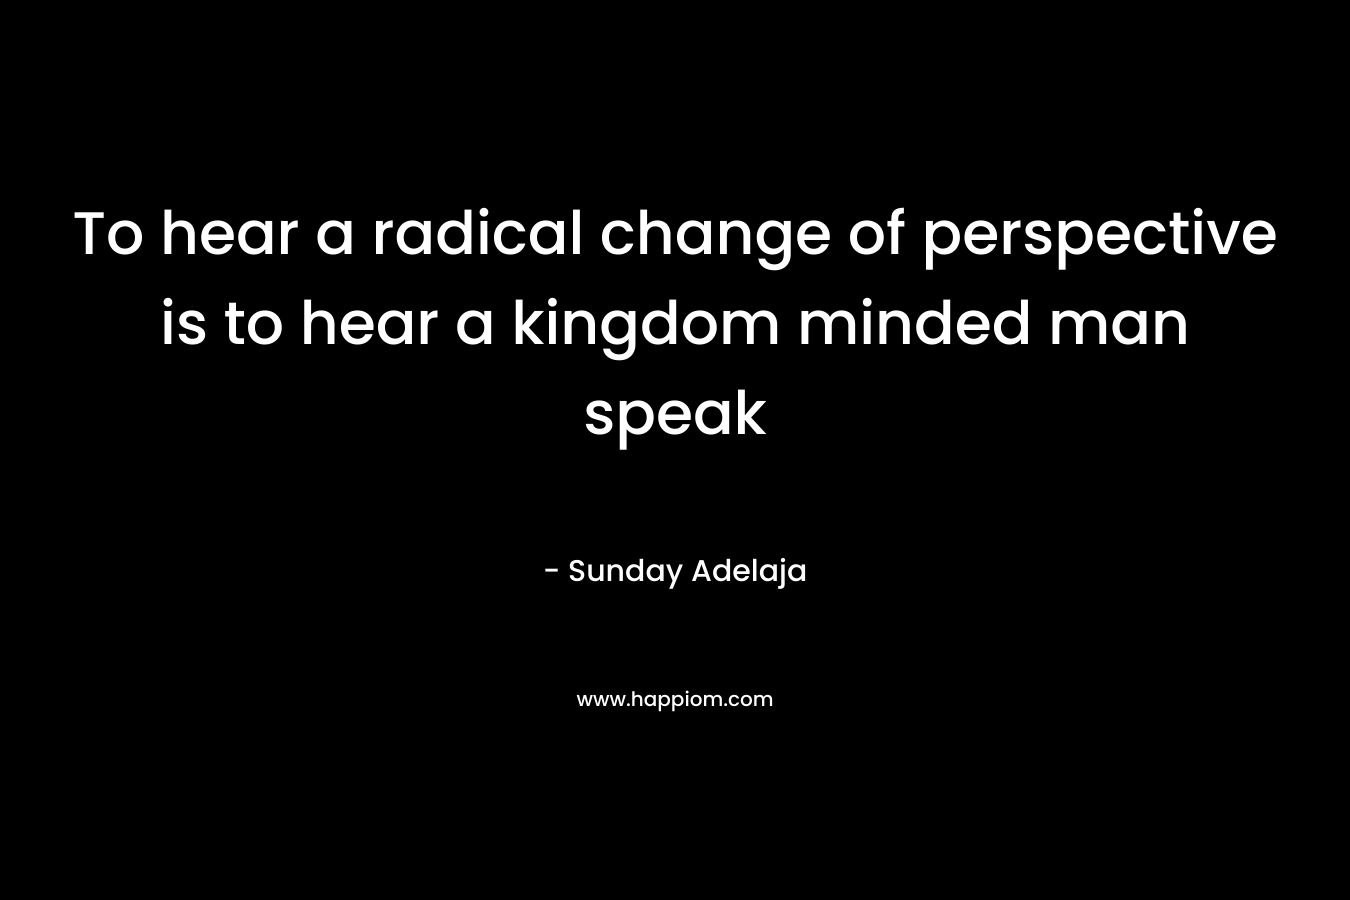 To hear a radical change of perspective is to hear a kingdom minded man speak